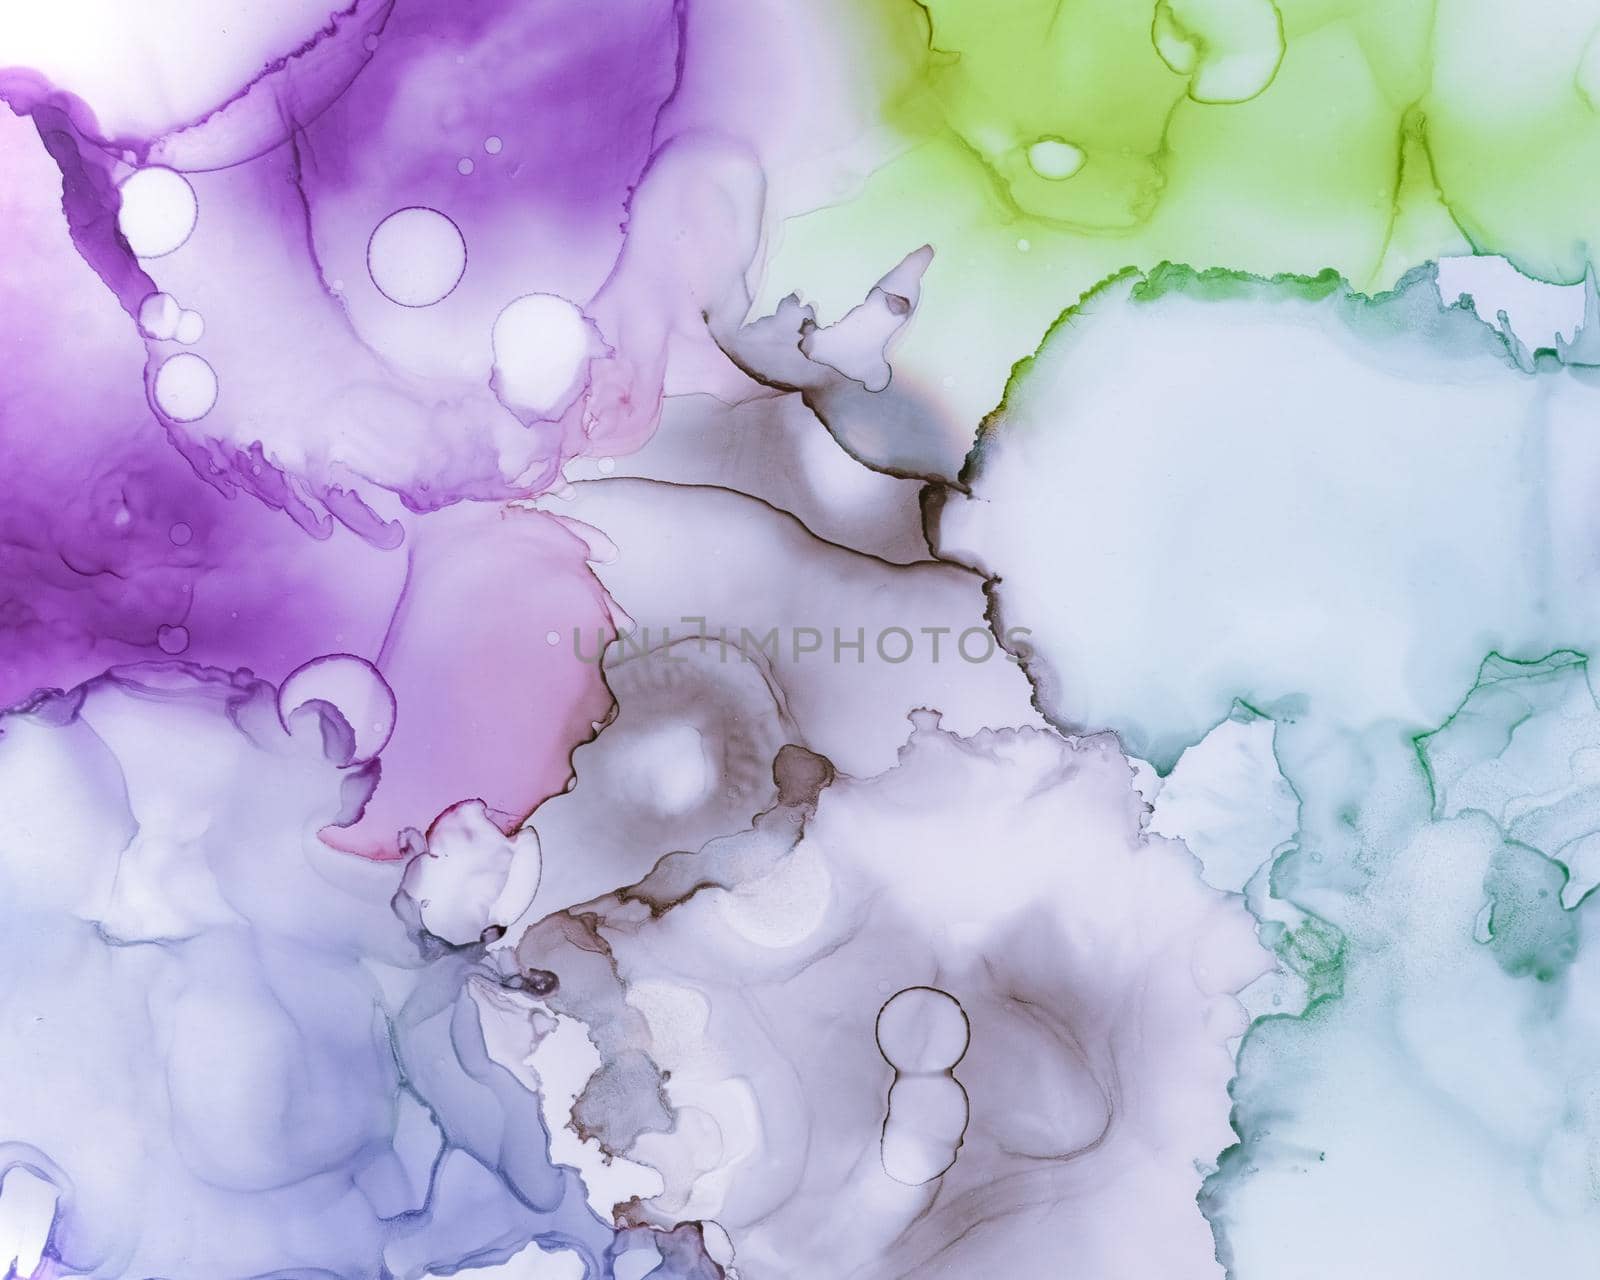 Ethereal Paint Texture. Alcohol Ink Wash Wallpaper. Lilac Creative Drop Canvas. Contemporary Color Design. Ethereal Art Pattern. Alcohol Ink Wash Background. Pink Ethereal Paint Pattern.